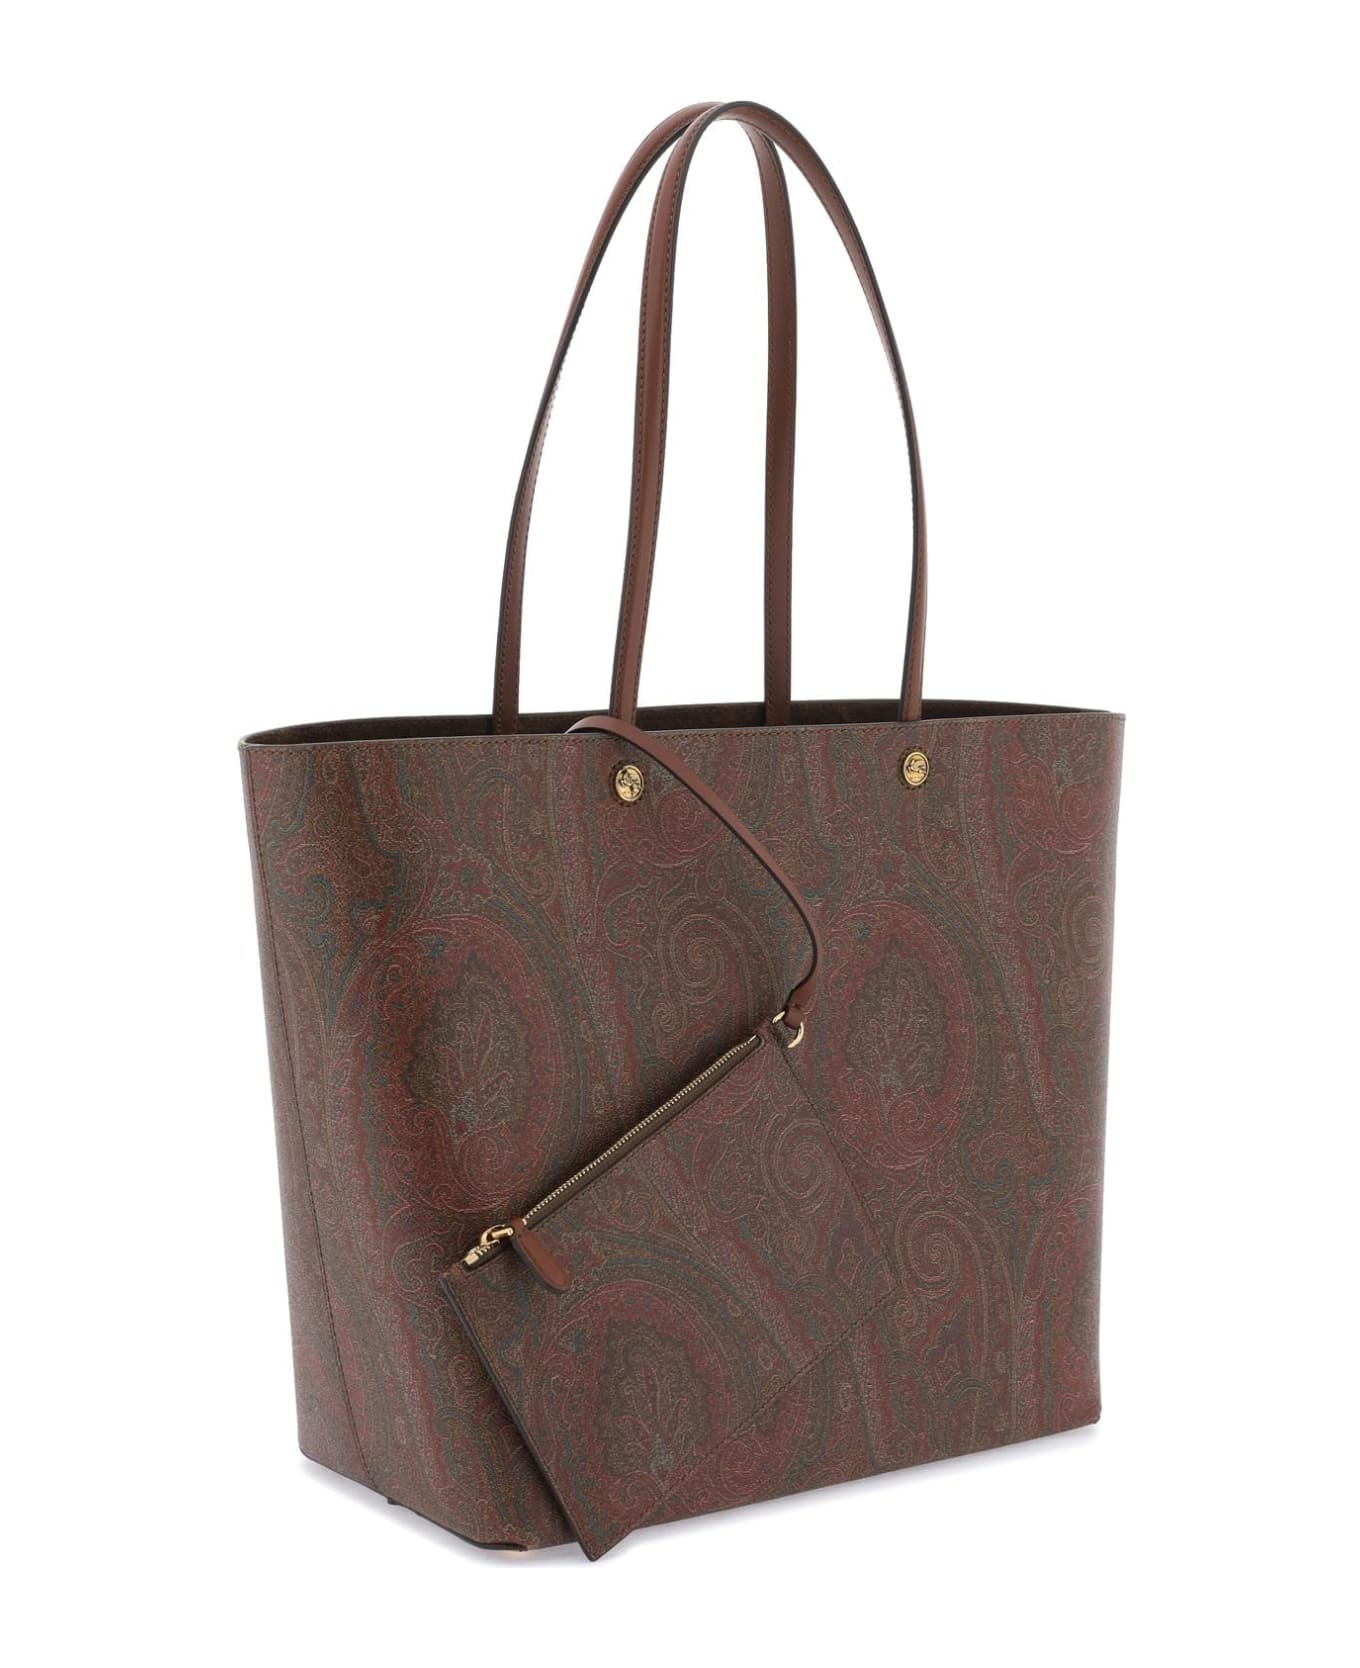 Etro Brown Leather Blend Bag - MARRONE SCURO 2 (Brown) トートバッグ